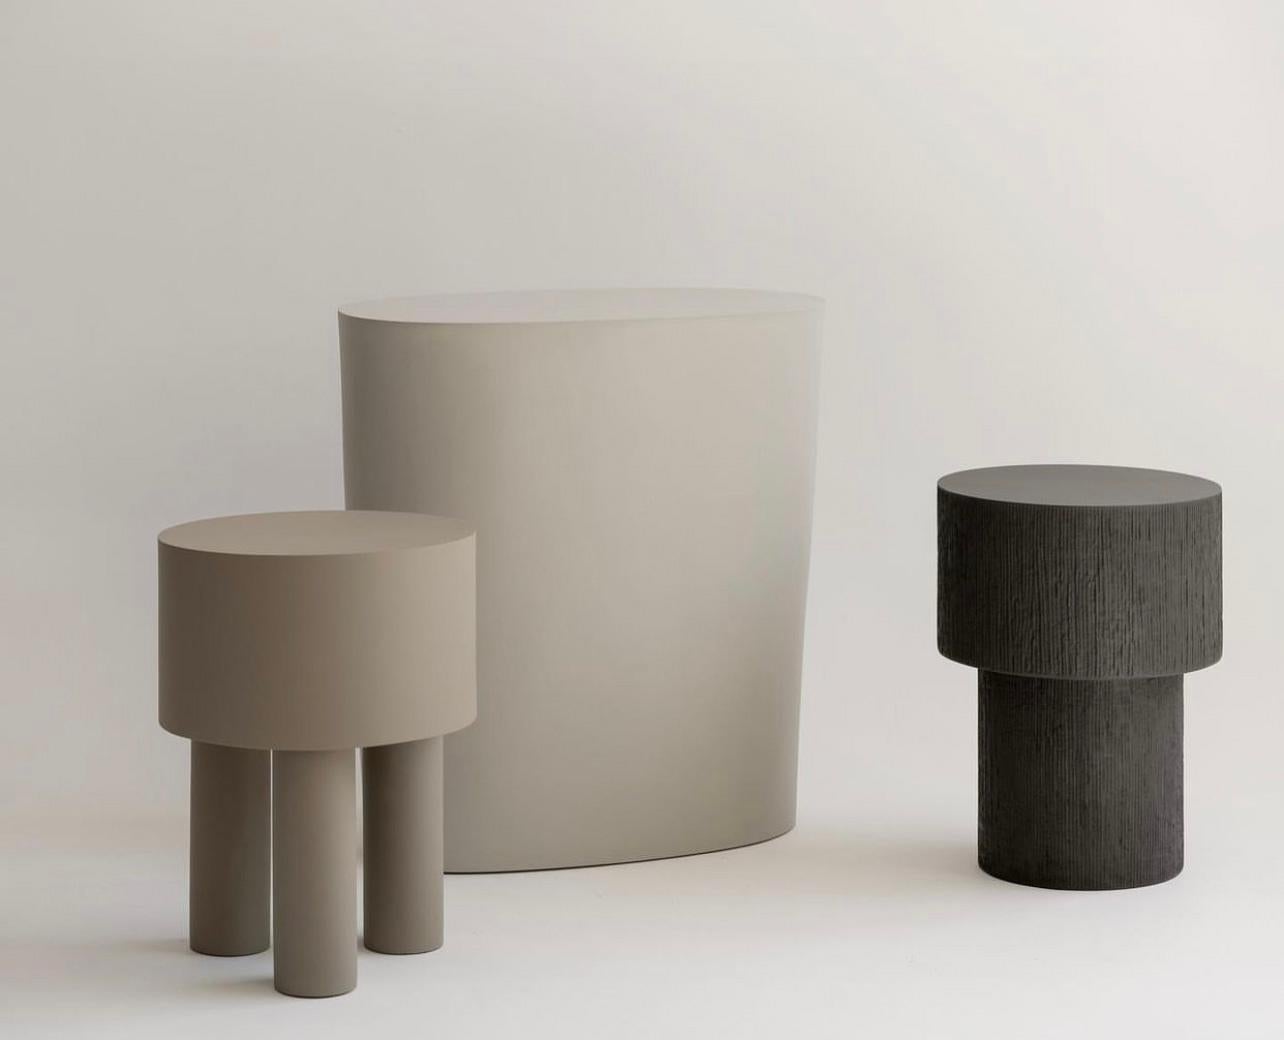 Contemporary Jesmonite Side Table - Pilotis Carved by Malgorzata Bany.

Inspired by support columns that lift a building above ground or water. Each piece is formed using a mould made of paper, used only once, making each piece unique. Available